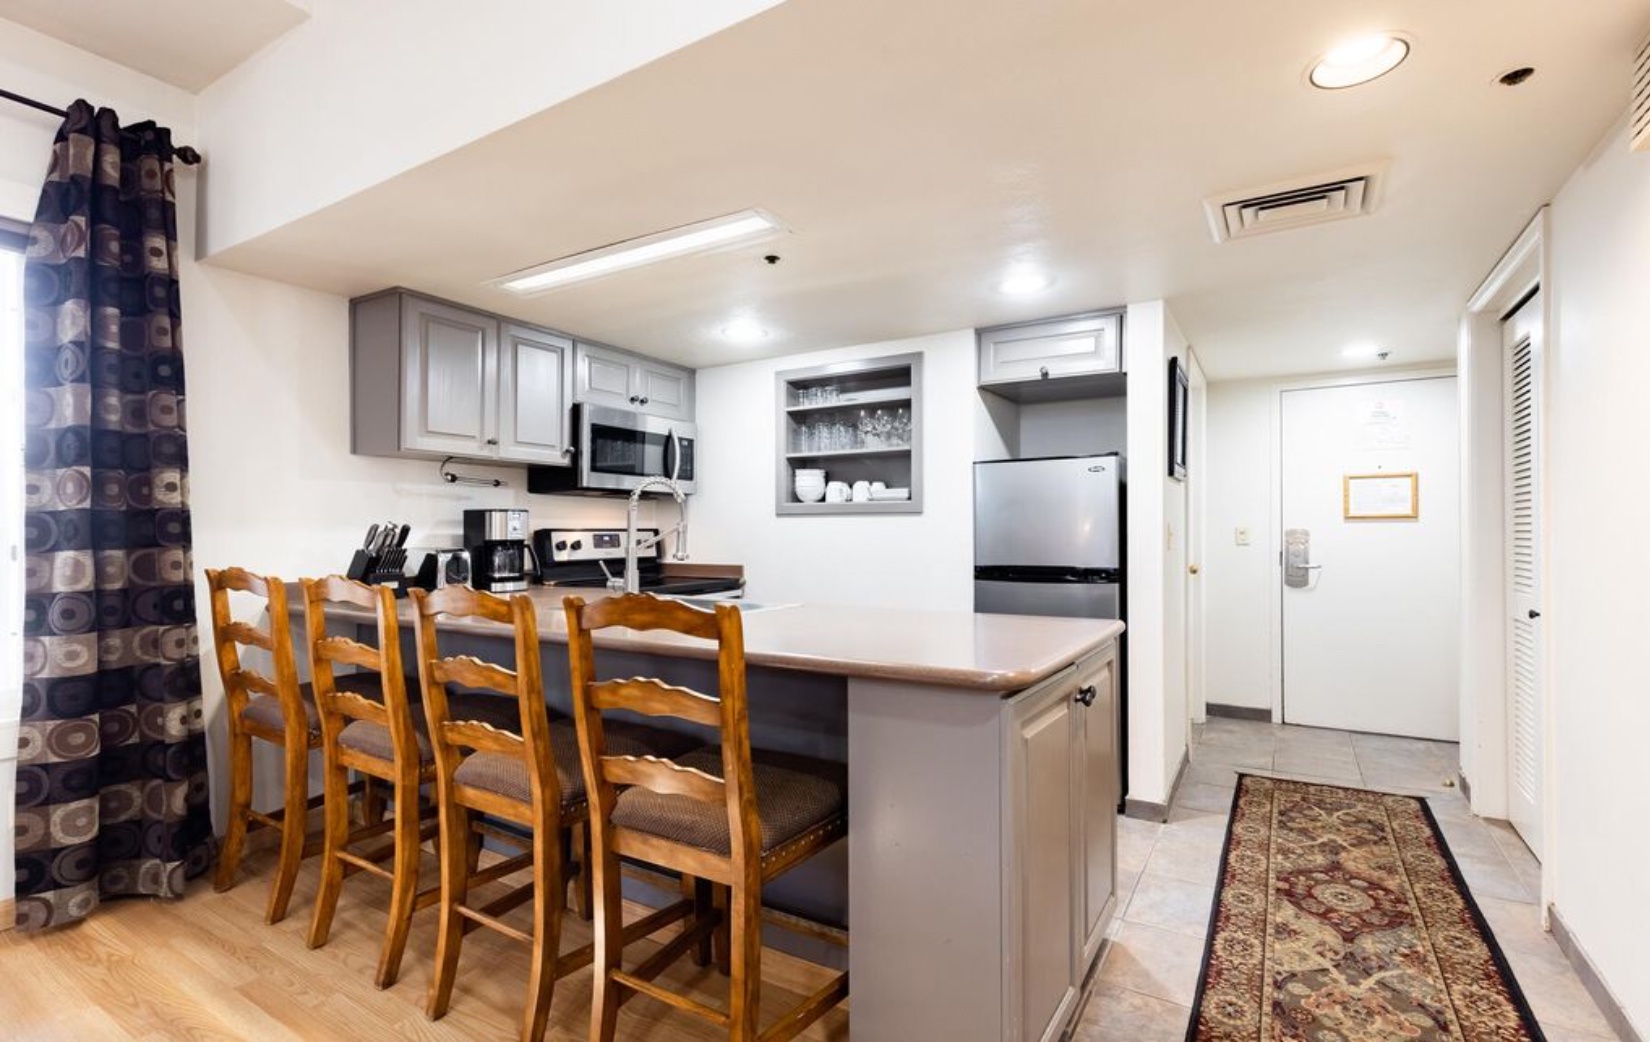 Park City Vacation Rentals, Studio Condo at The Lodge at Mountain Village - Additional seating